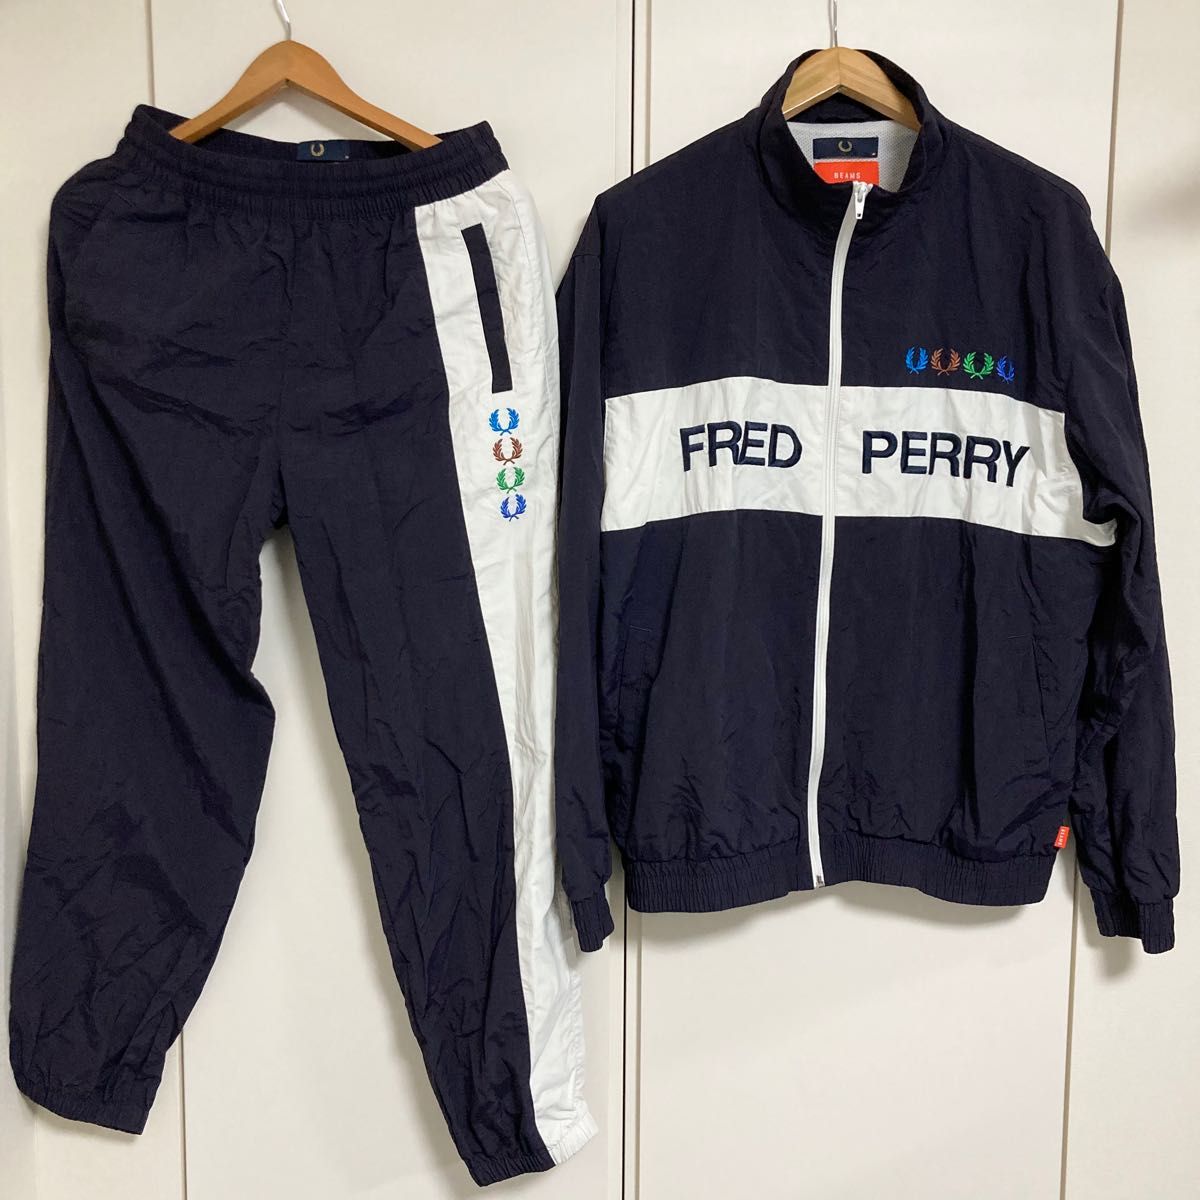 FRED PERRY×BEAMS トラックジャケット&パンツセットアップ 貴重 送料